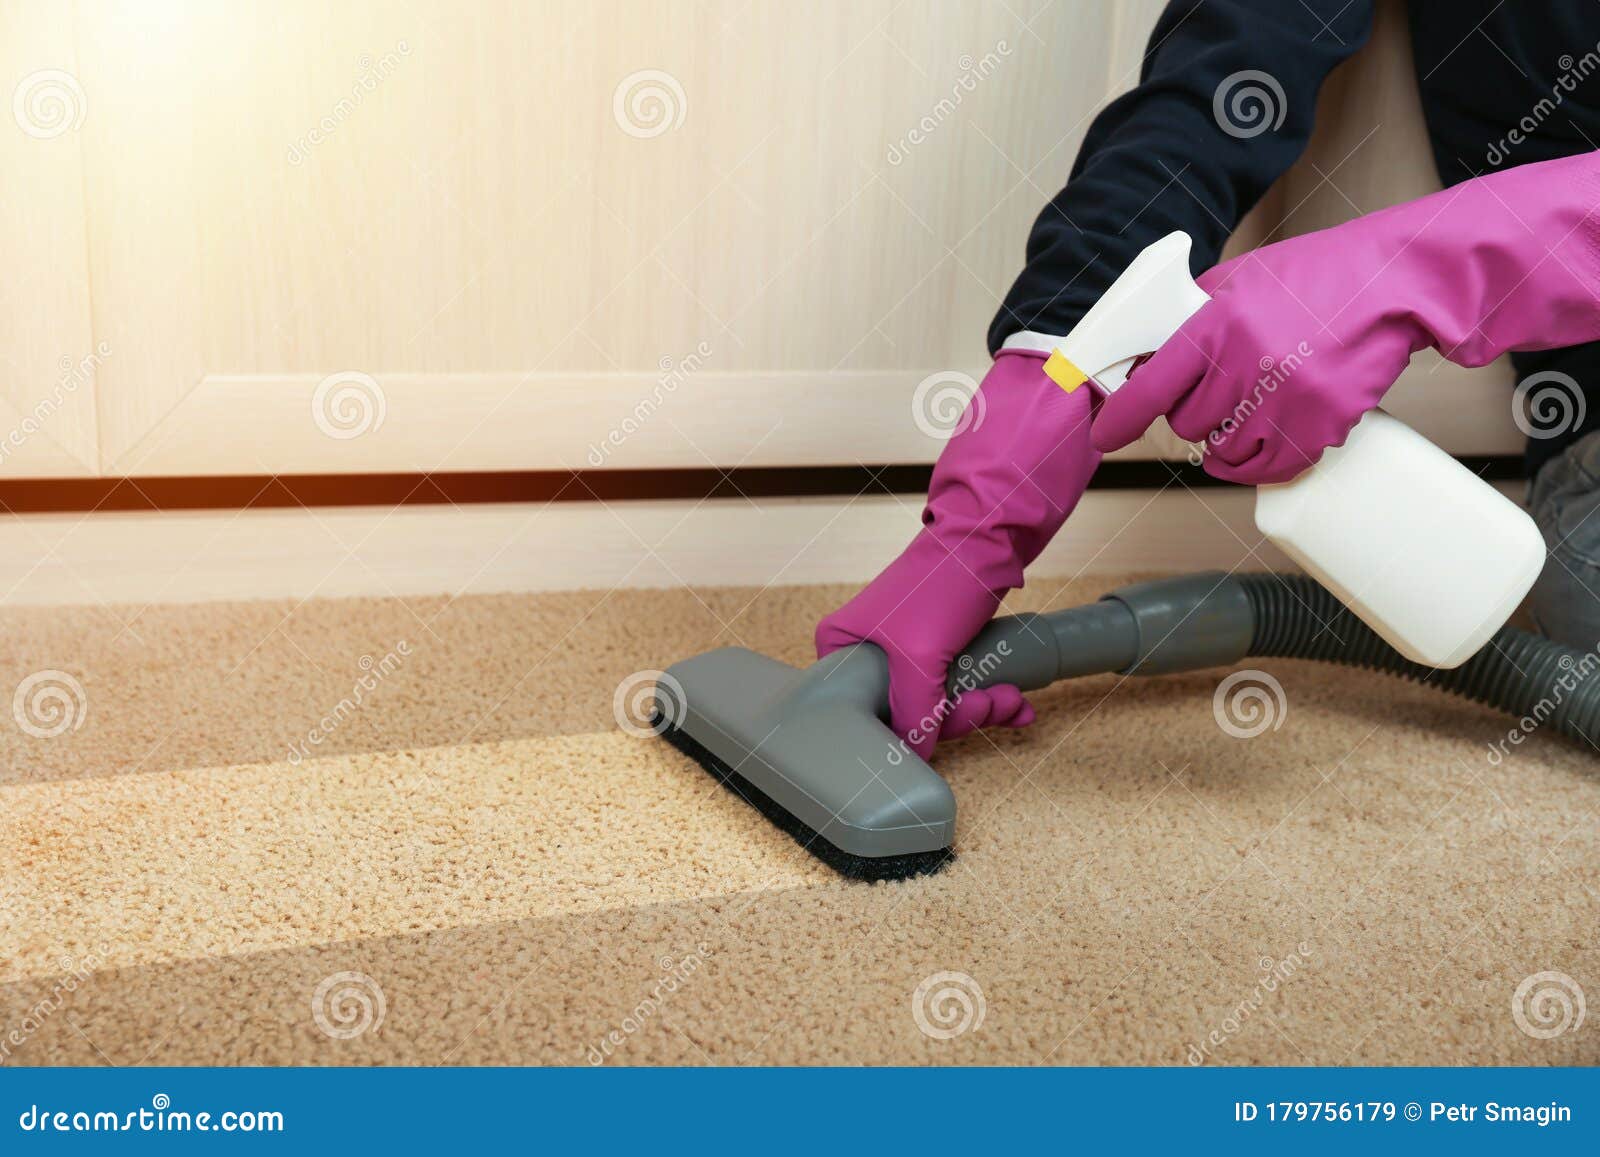 carpet cleaning concept. cleaner`s hand in gloves sprays cleaning agent on the carpet and vacuums it.